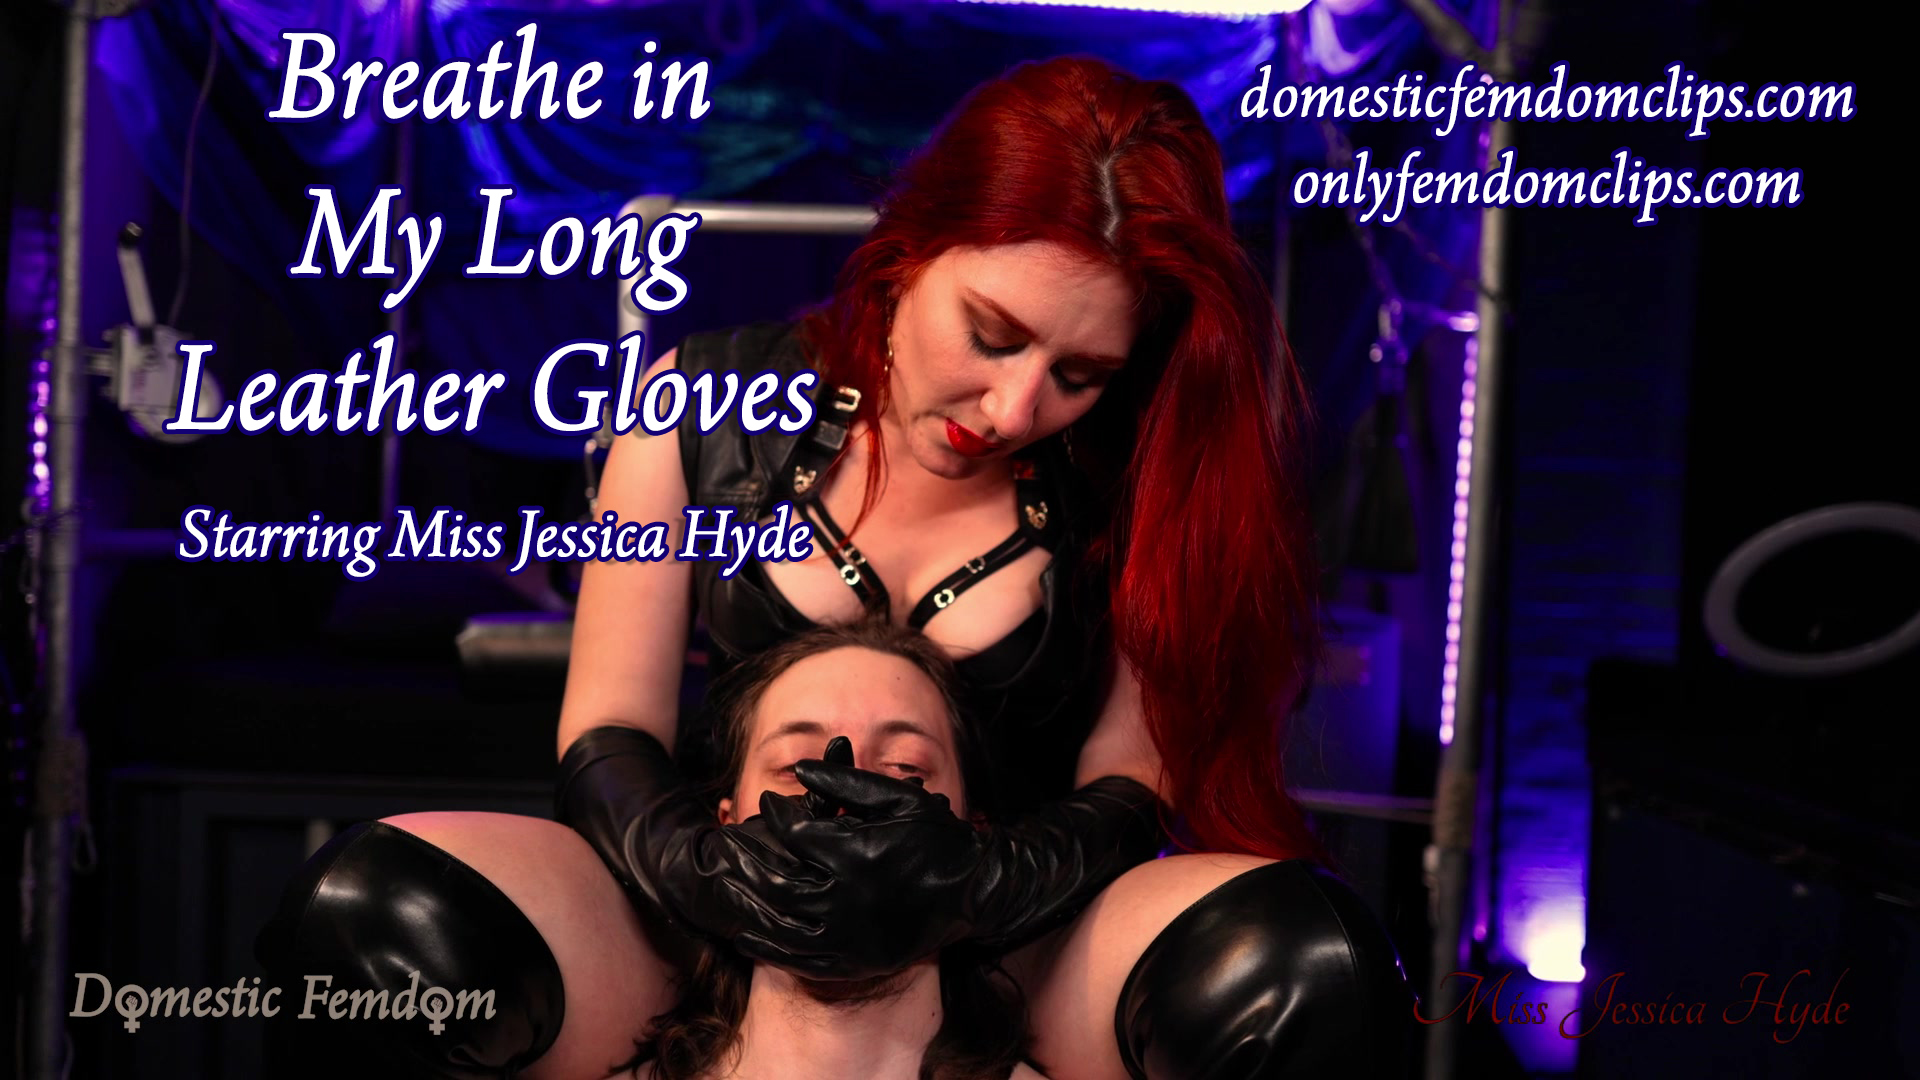 breathe in my long leather gloves title - Breathe in My Long Leather Gloves